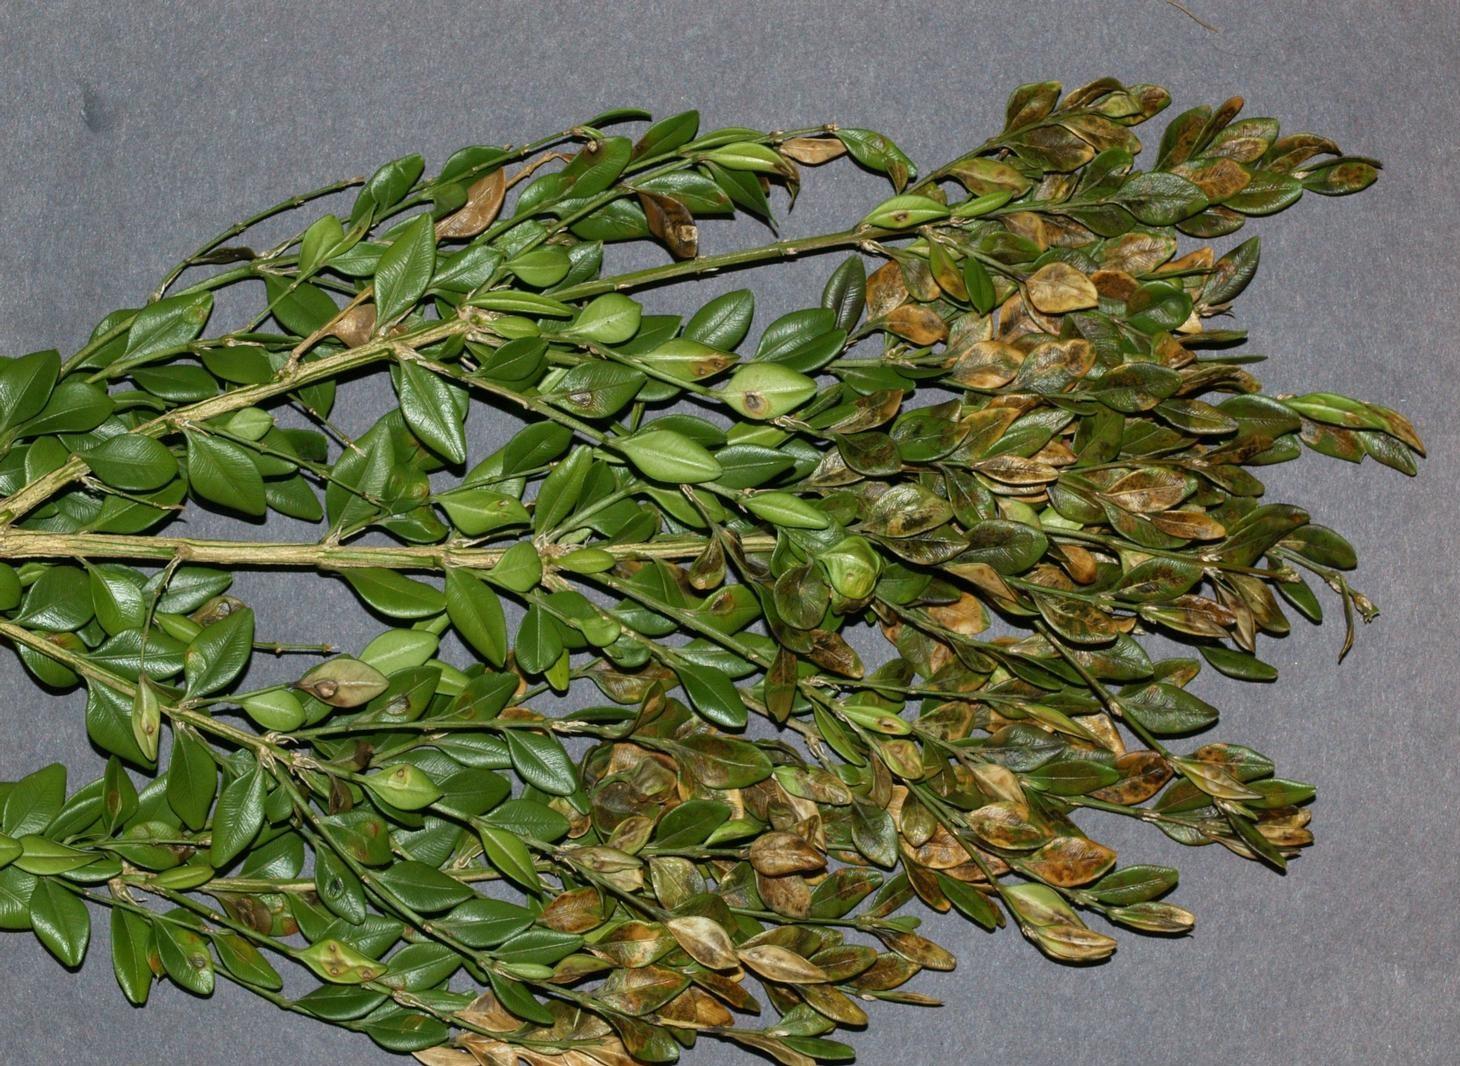 brown puckered leaves of boxwood from leafminer insect damage